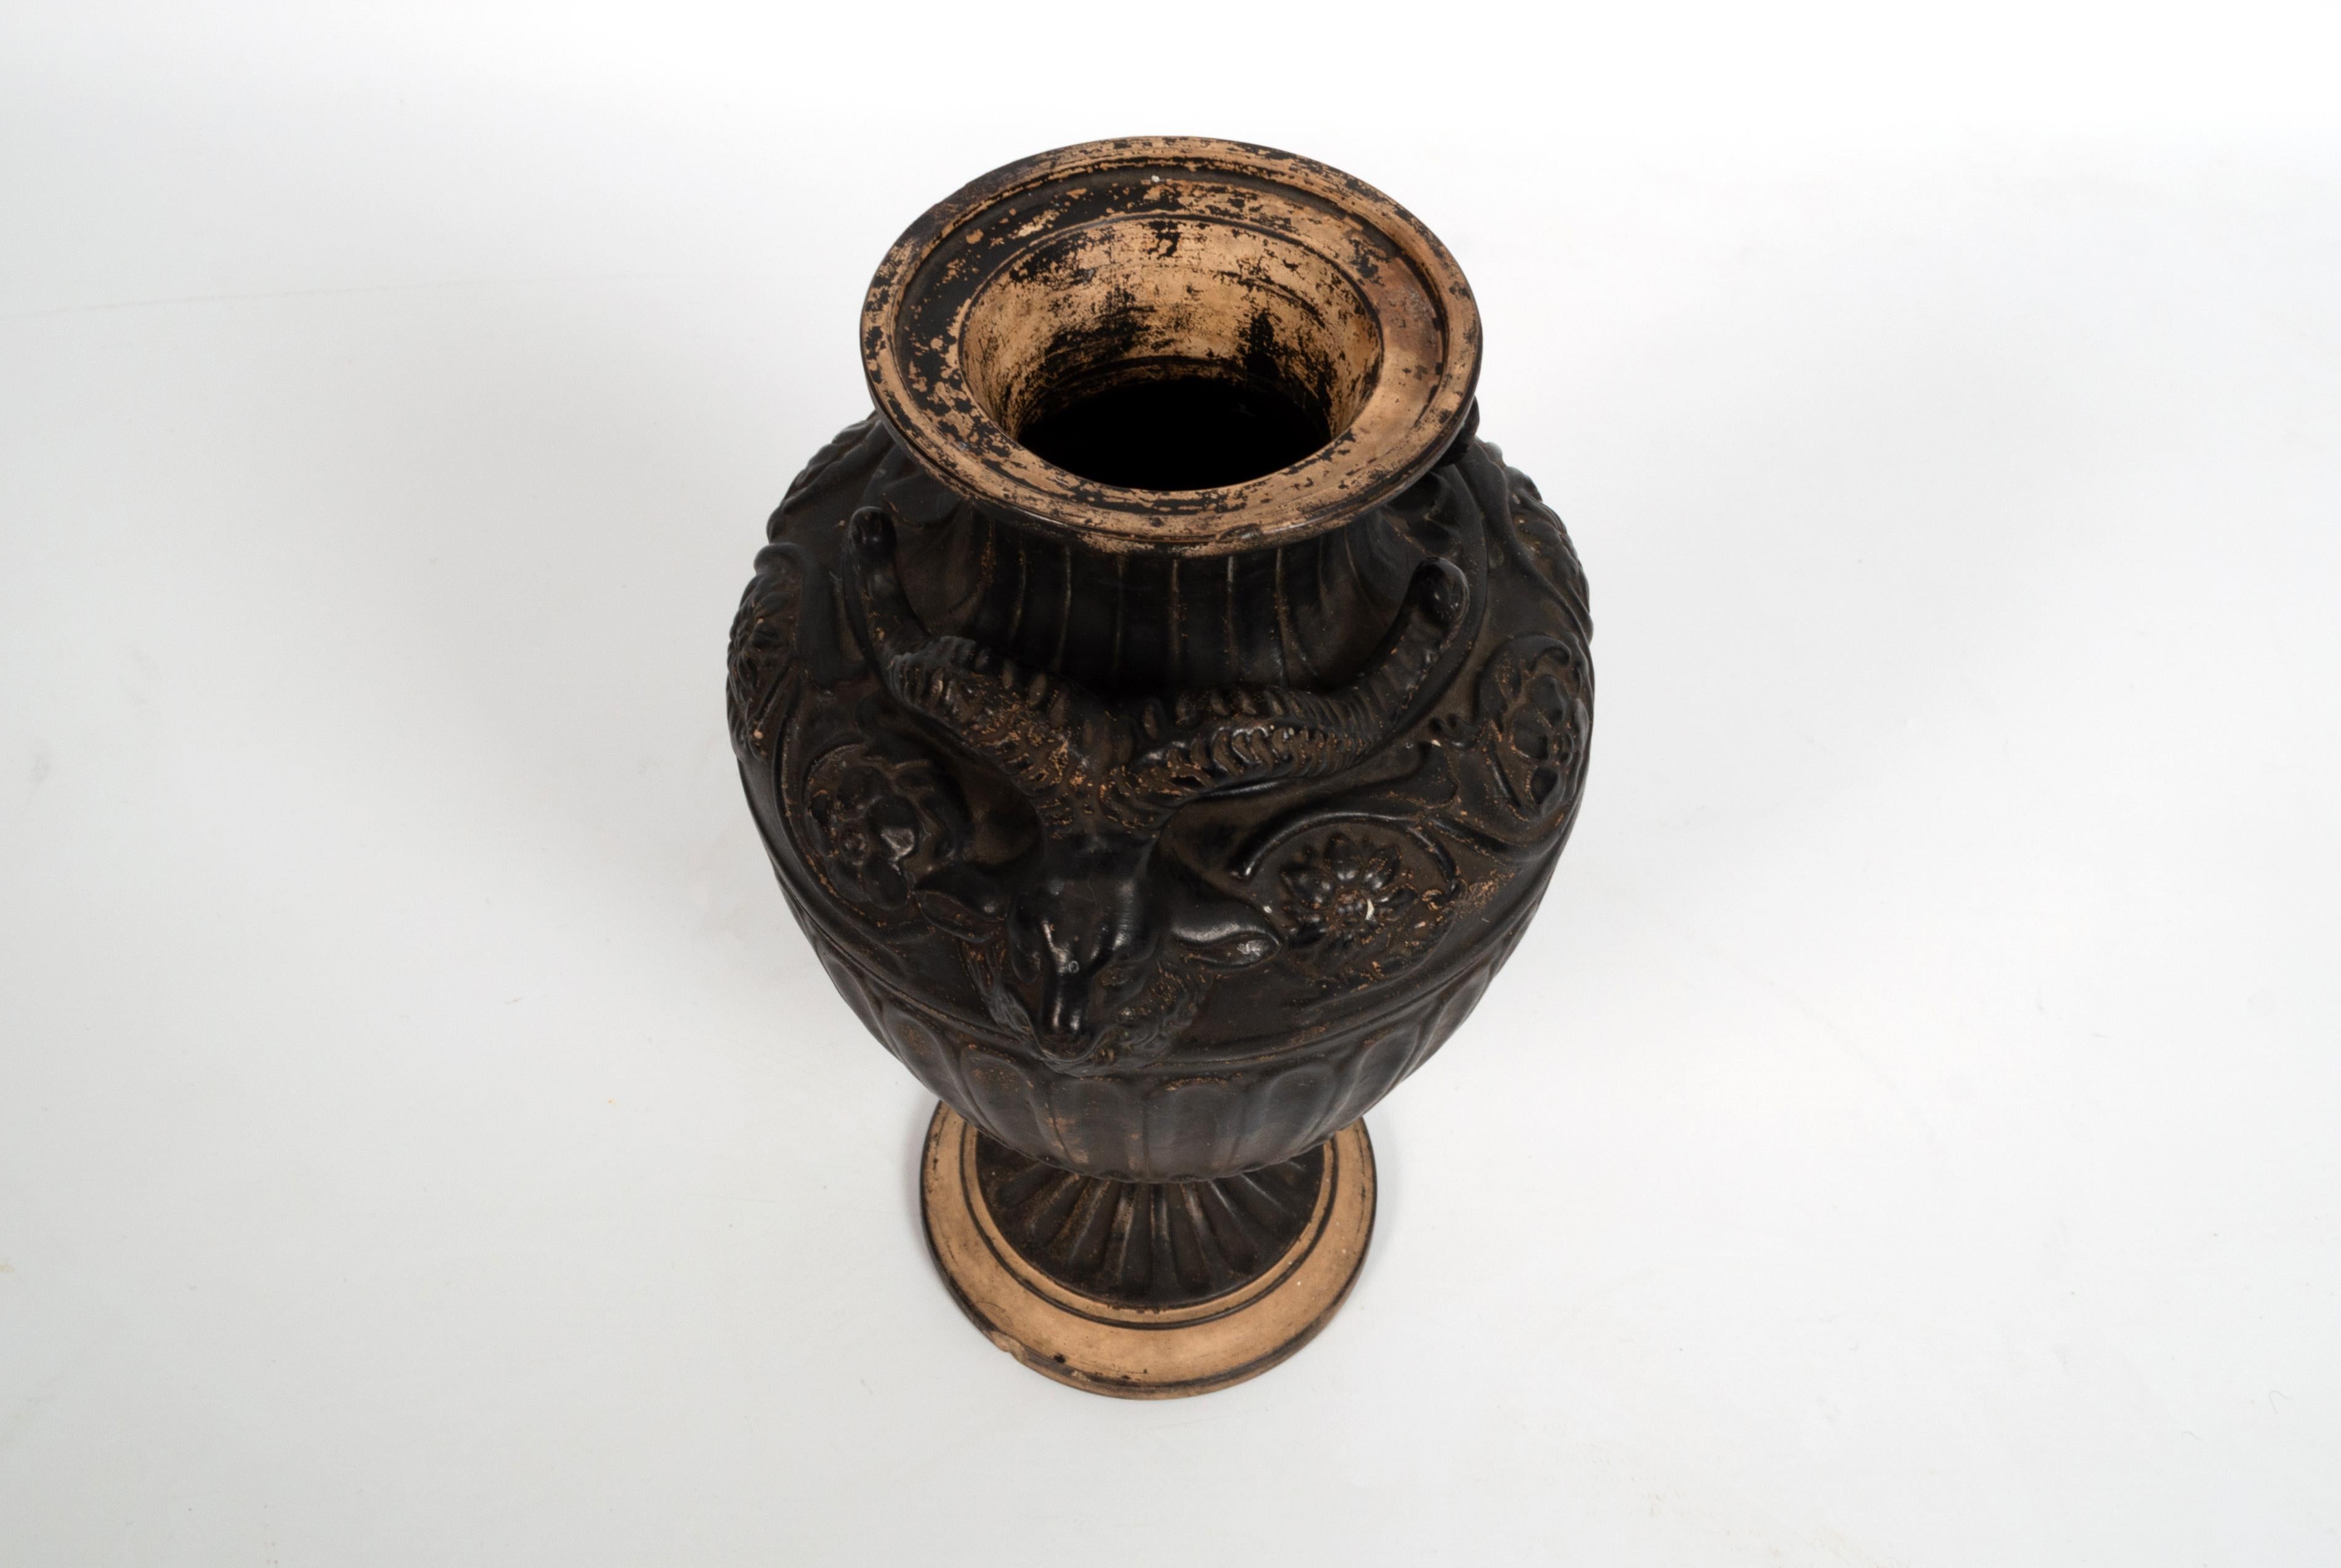 Antique 19th Century Neoclassical Vase By Gerbing & Stephan, Germany, 1892 For Sale 1